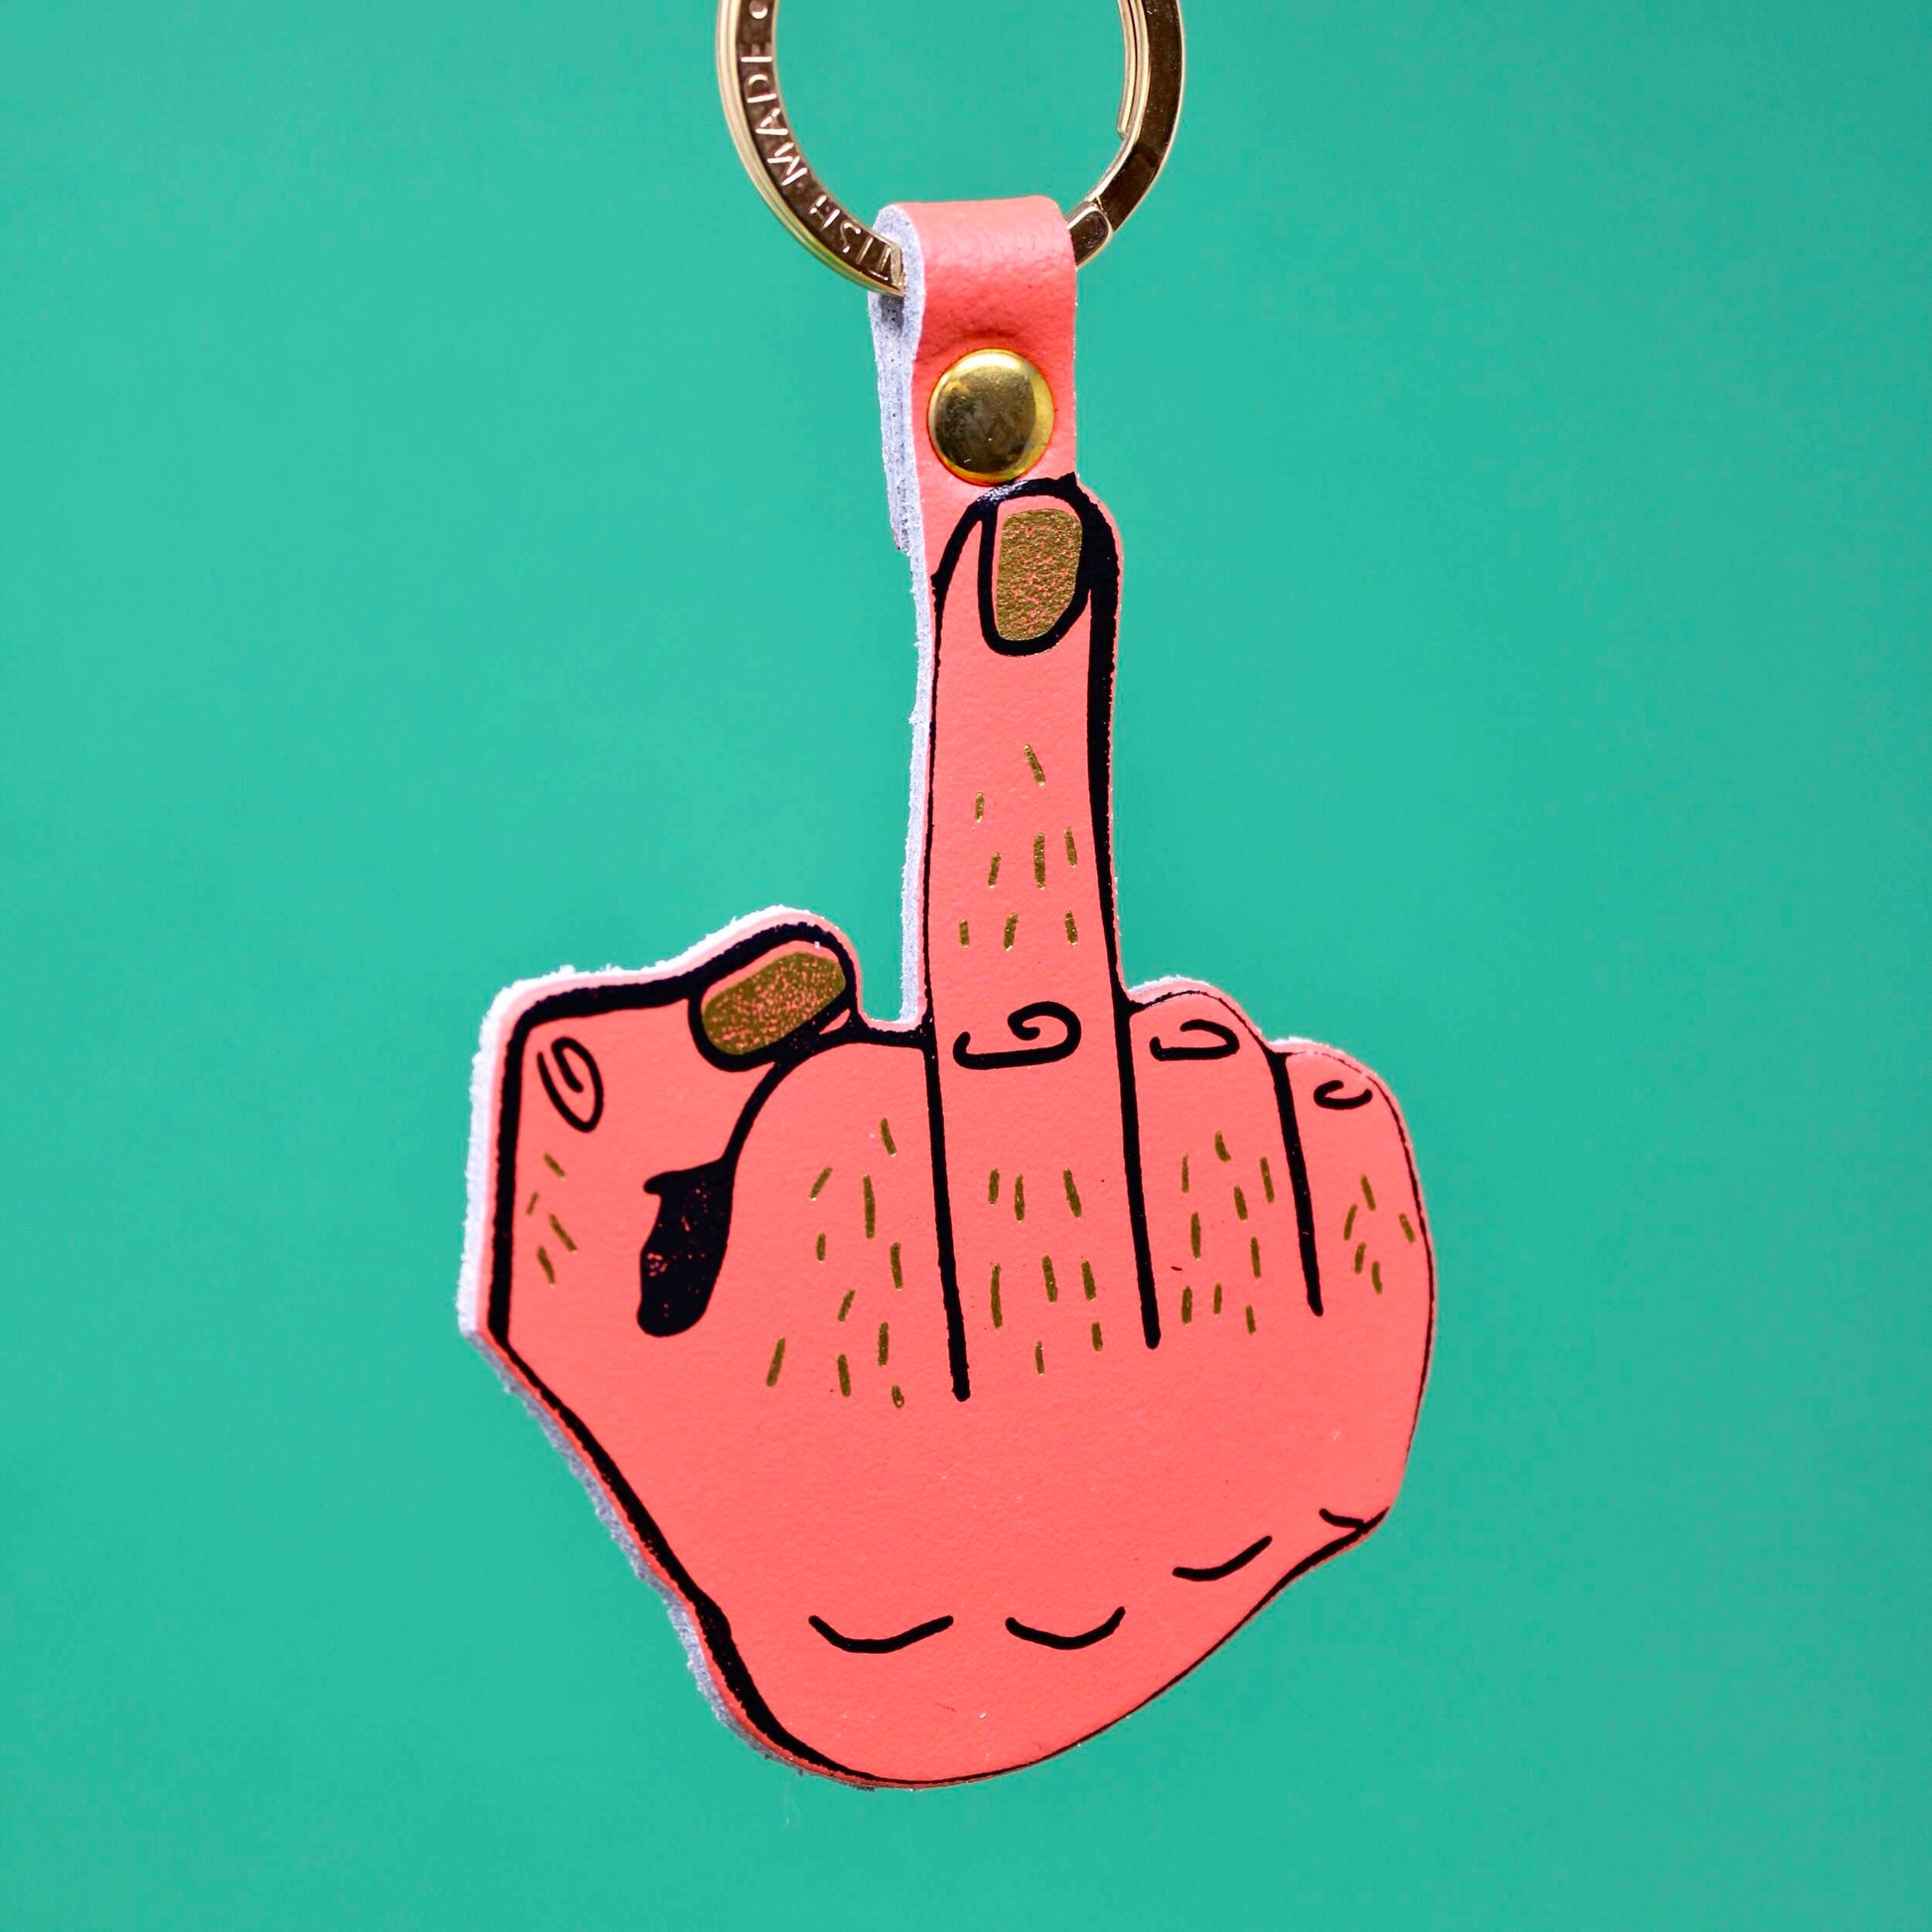 Cheeky genuine leather key ring by Ark Colour Design featuring a pink hand making the middle finger swear sign.